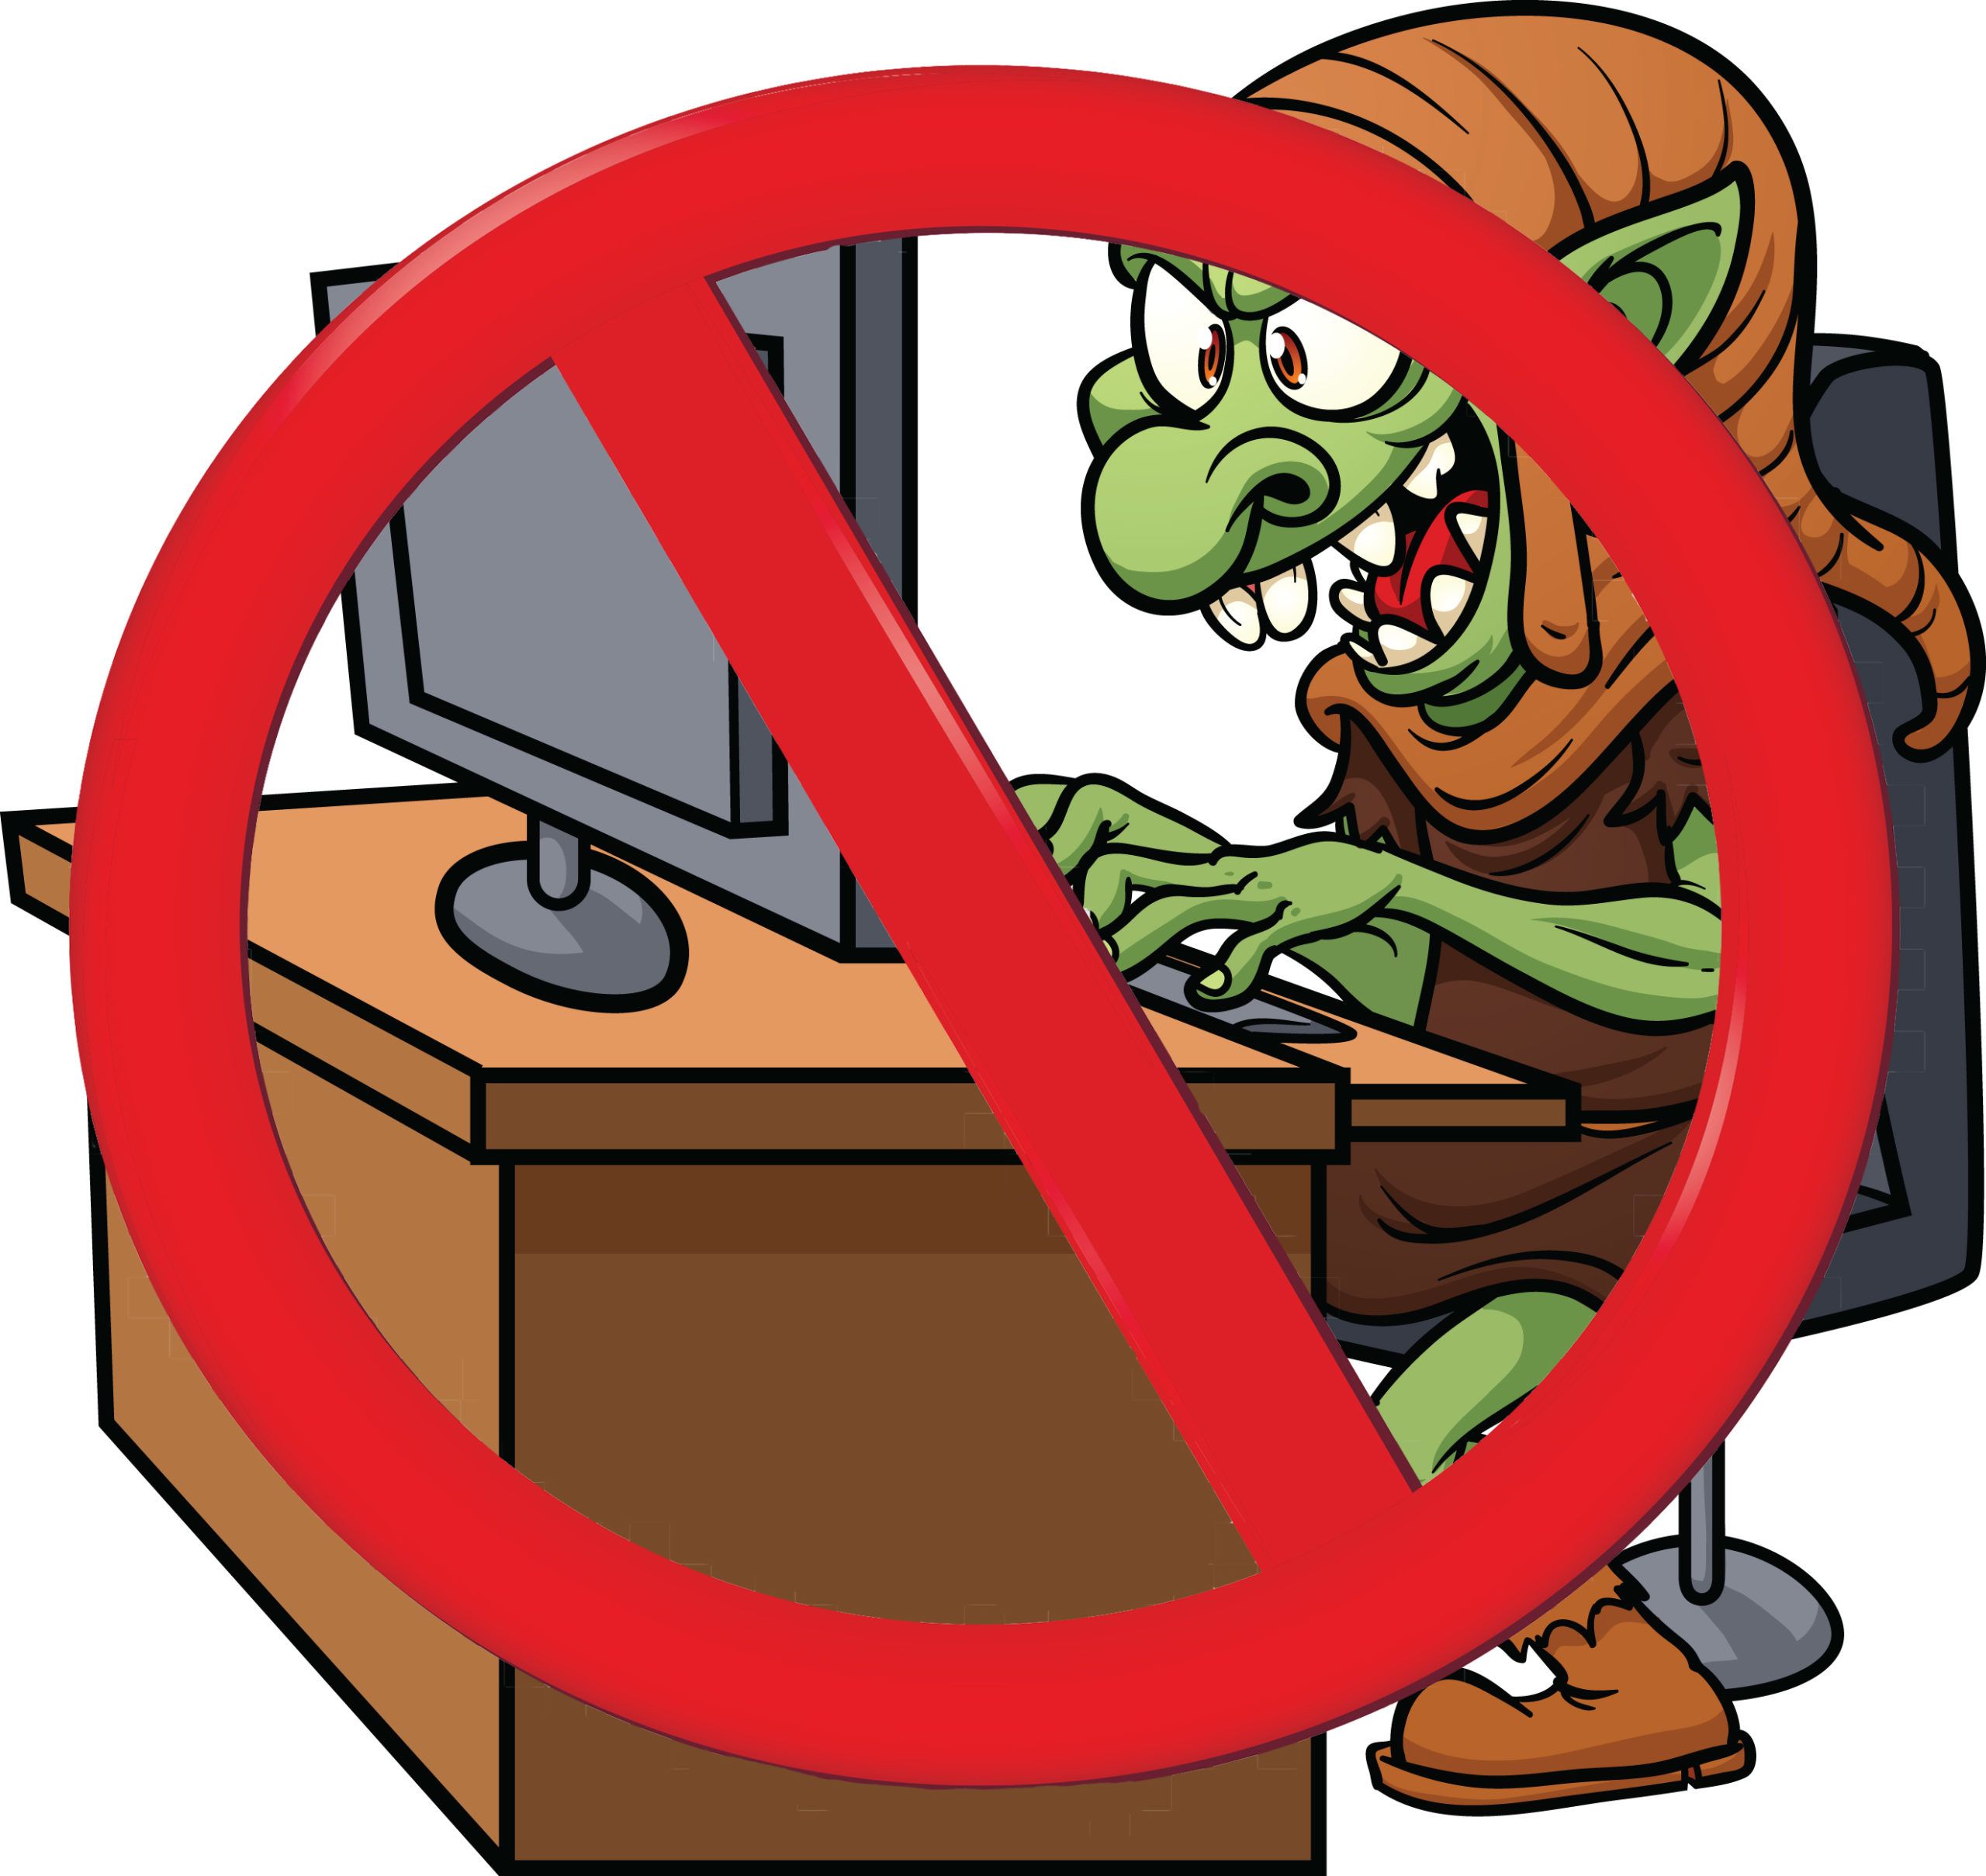 Troll on a computer